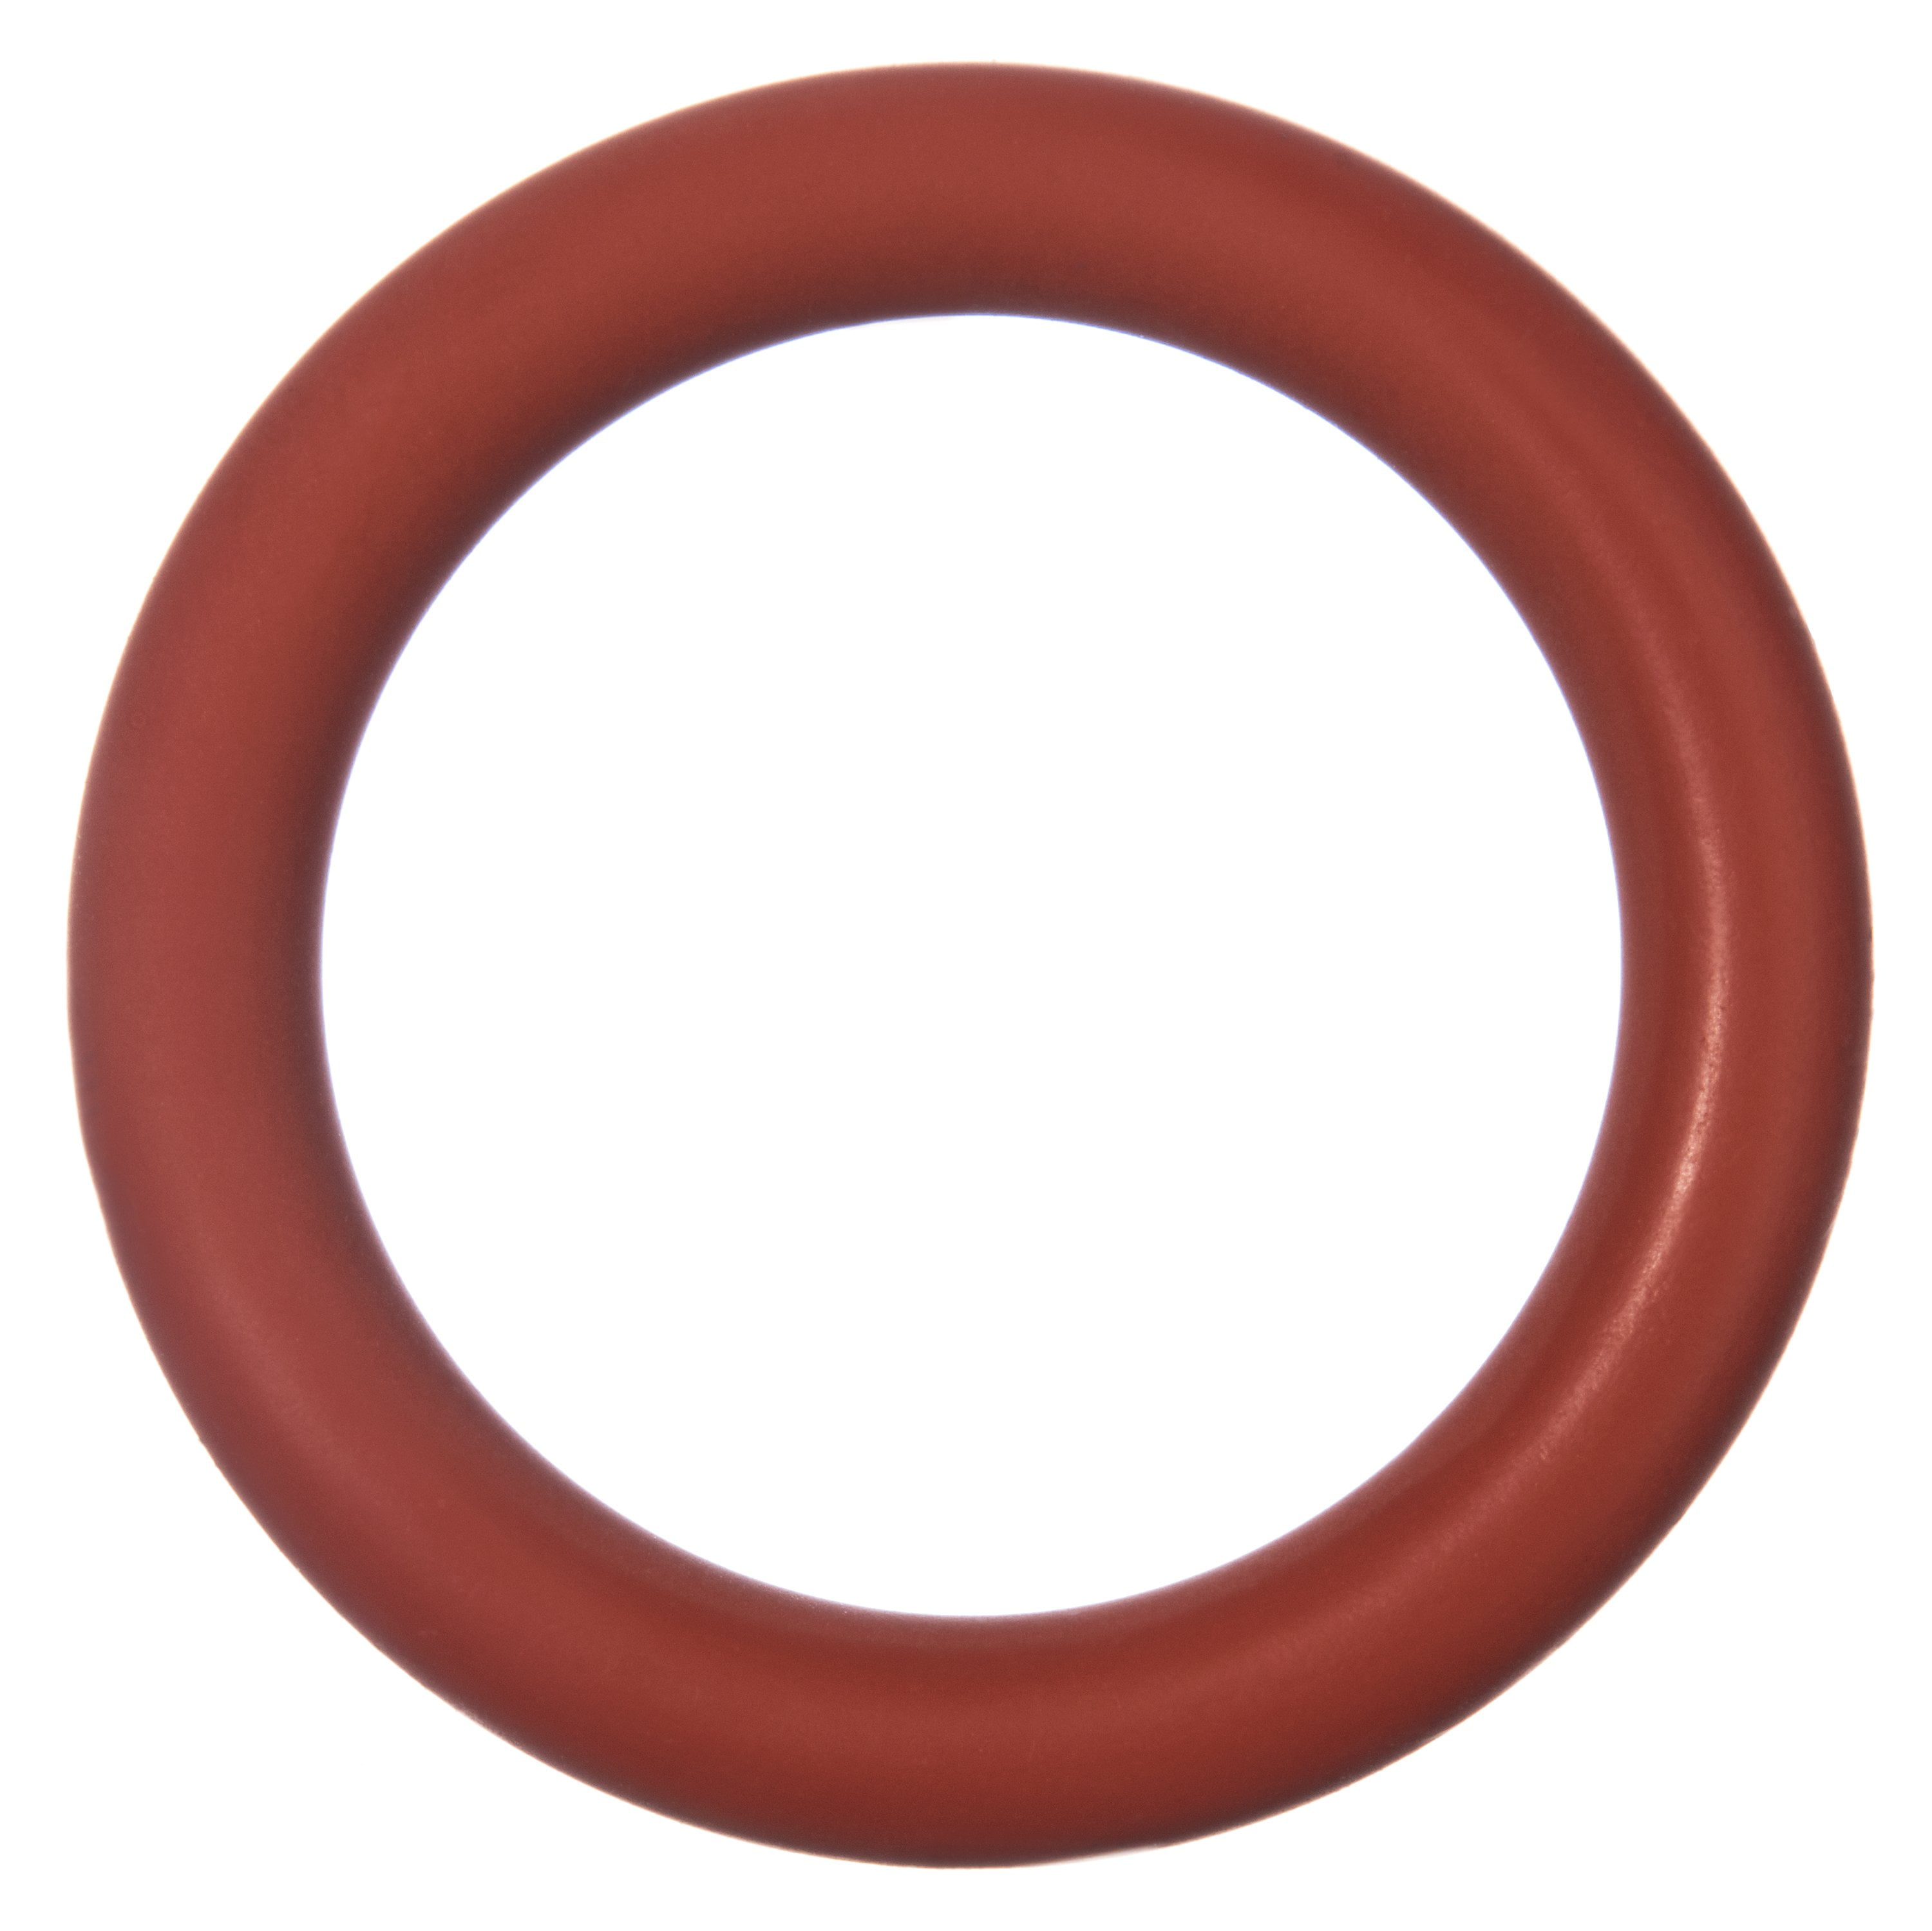 Silicone O-rings 32 x 4mm Price for 5 pcs 